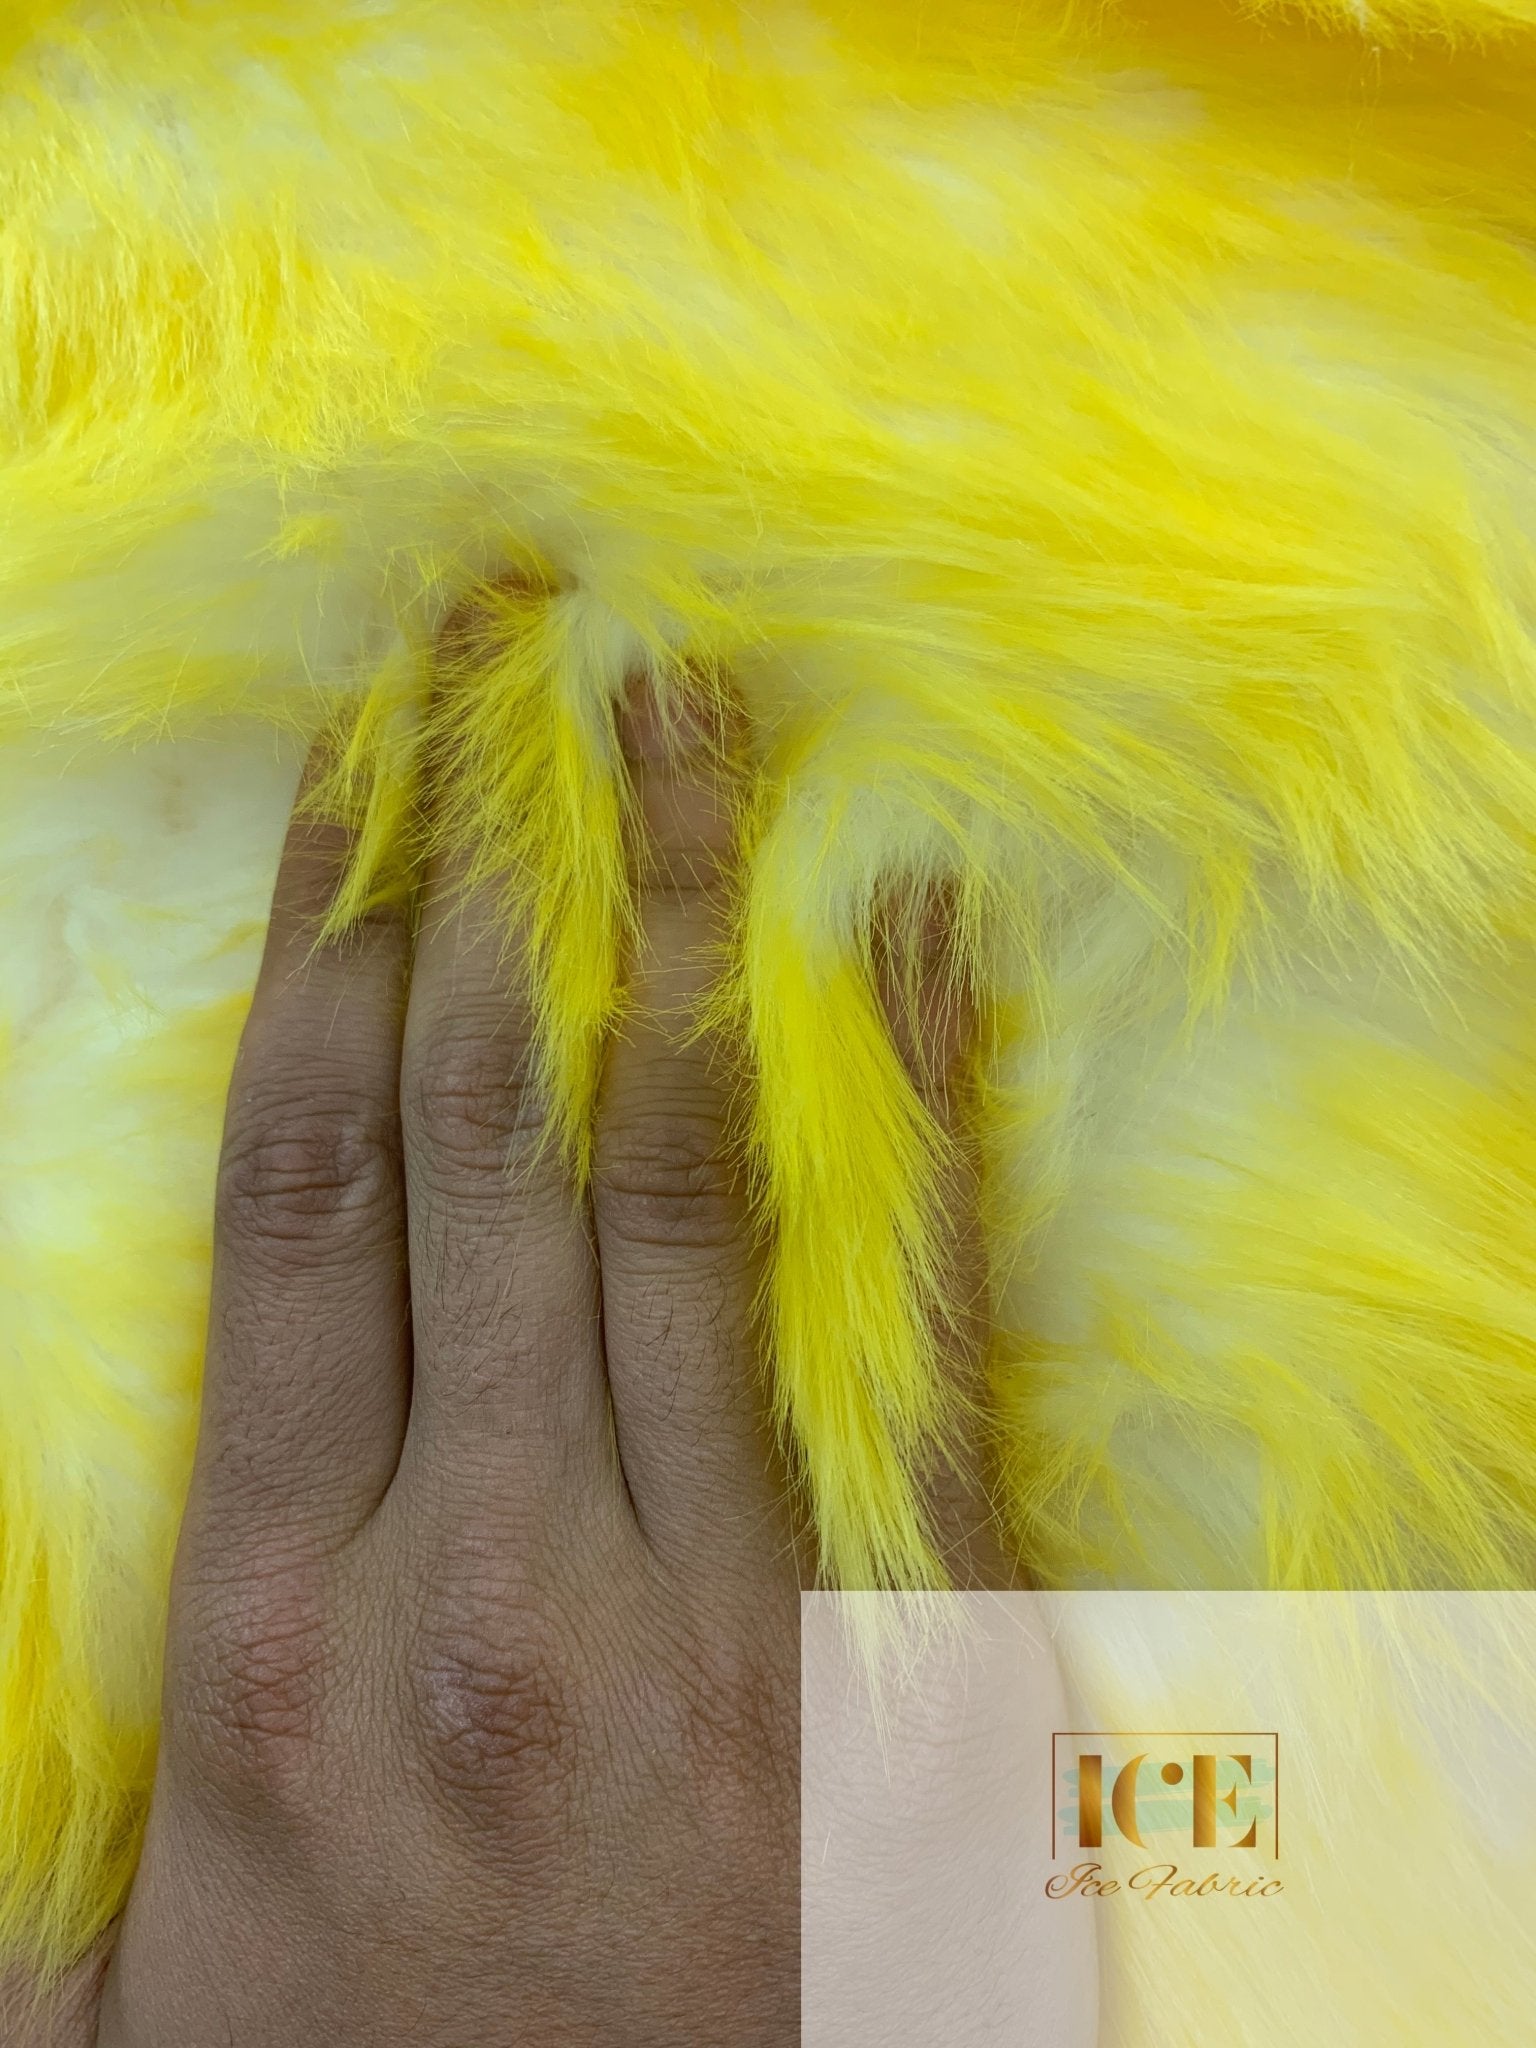 Canadian Fox 2 Tone Shaggy Long Pile Faux Fur Fabric For Blankets, Costumes, Bed SpreadICEFABRICICE FABRICSYellowBy The Yard (60 inches Wide)Canadian Fox 2 Tone Shaggy Long Pile Faux Fur Fabric For Blankets, Costumes, Bed Spread ICEFABRIC Yellow